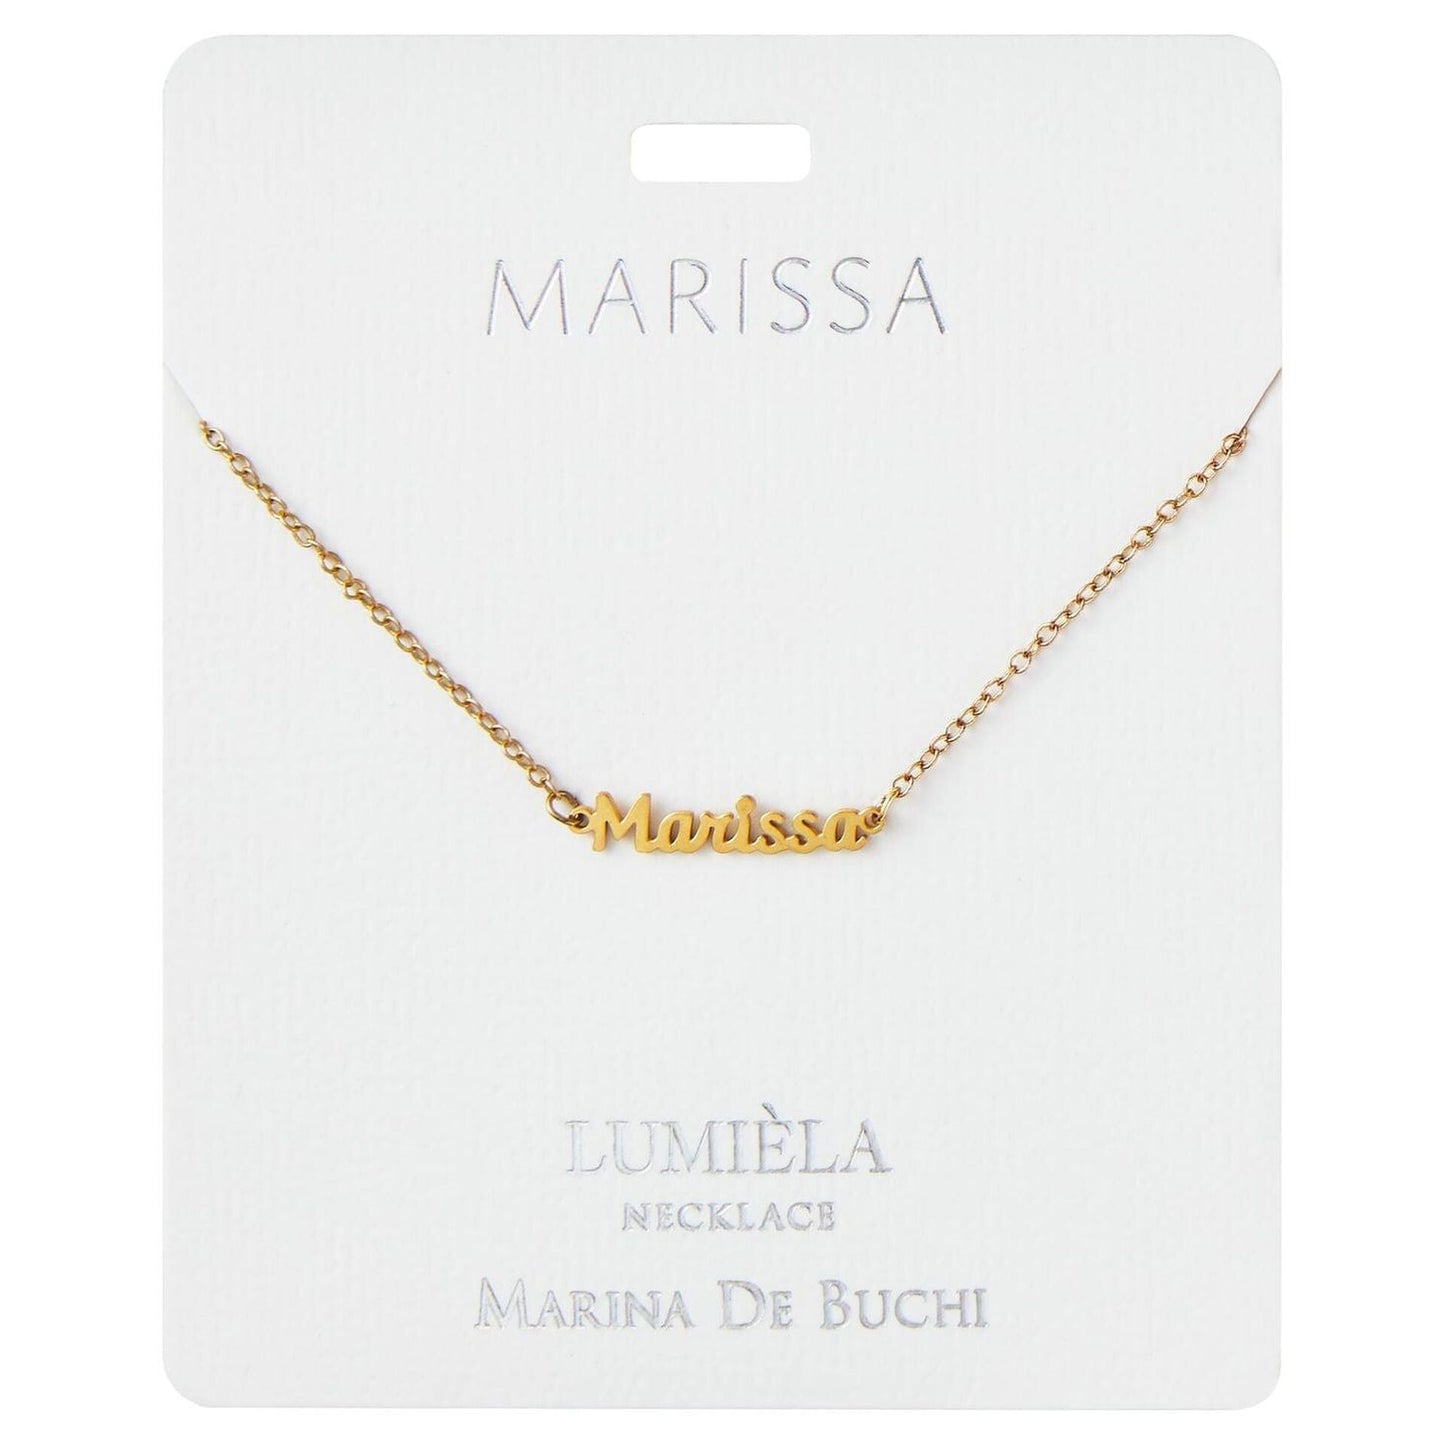 Lumiela Personalized Nameplate Katelyn Necklace in Gold Tone